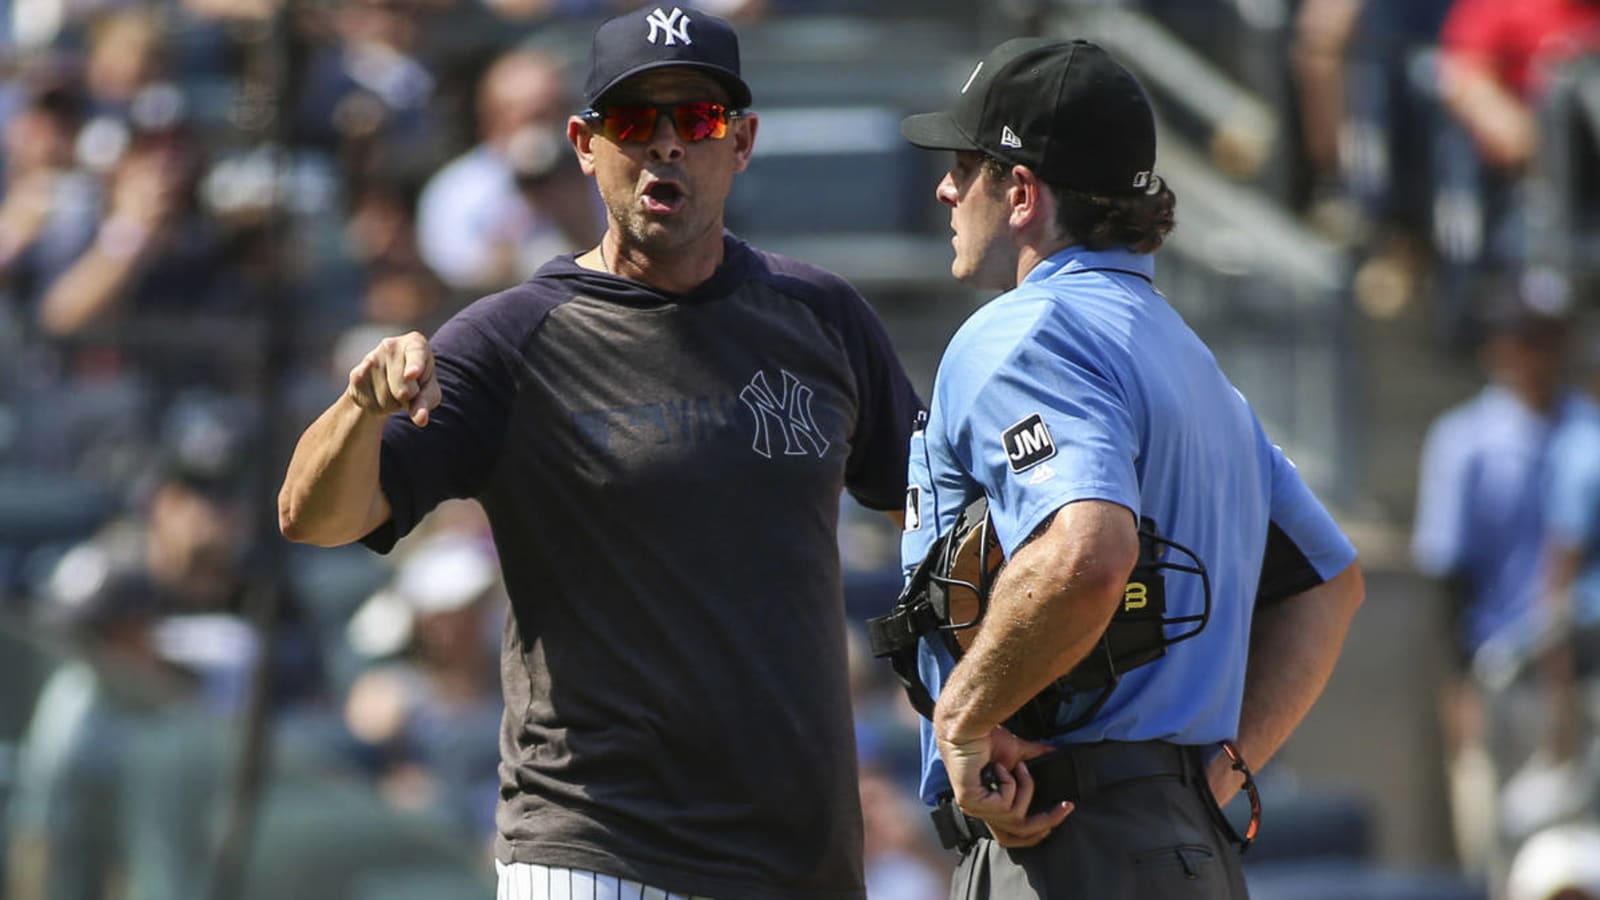 Yankees troll umpire with playoff slogan 'October Savages